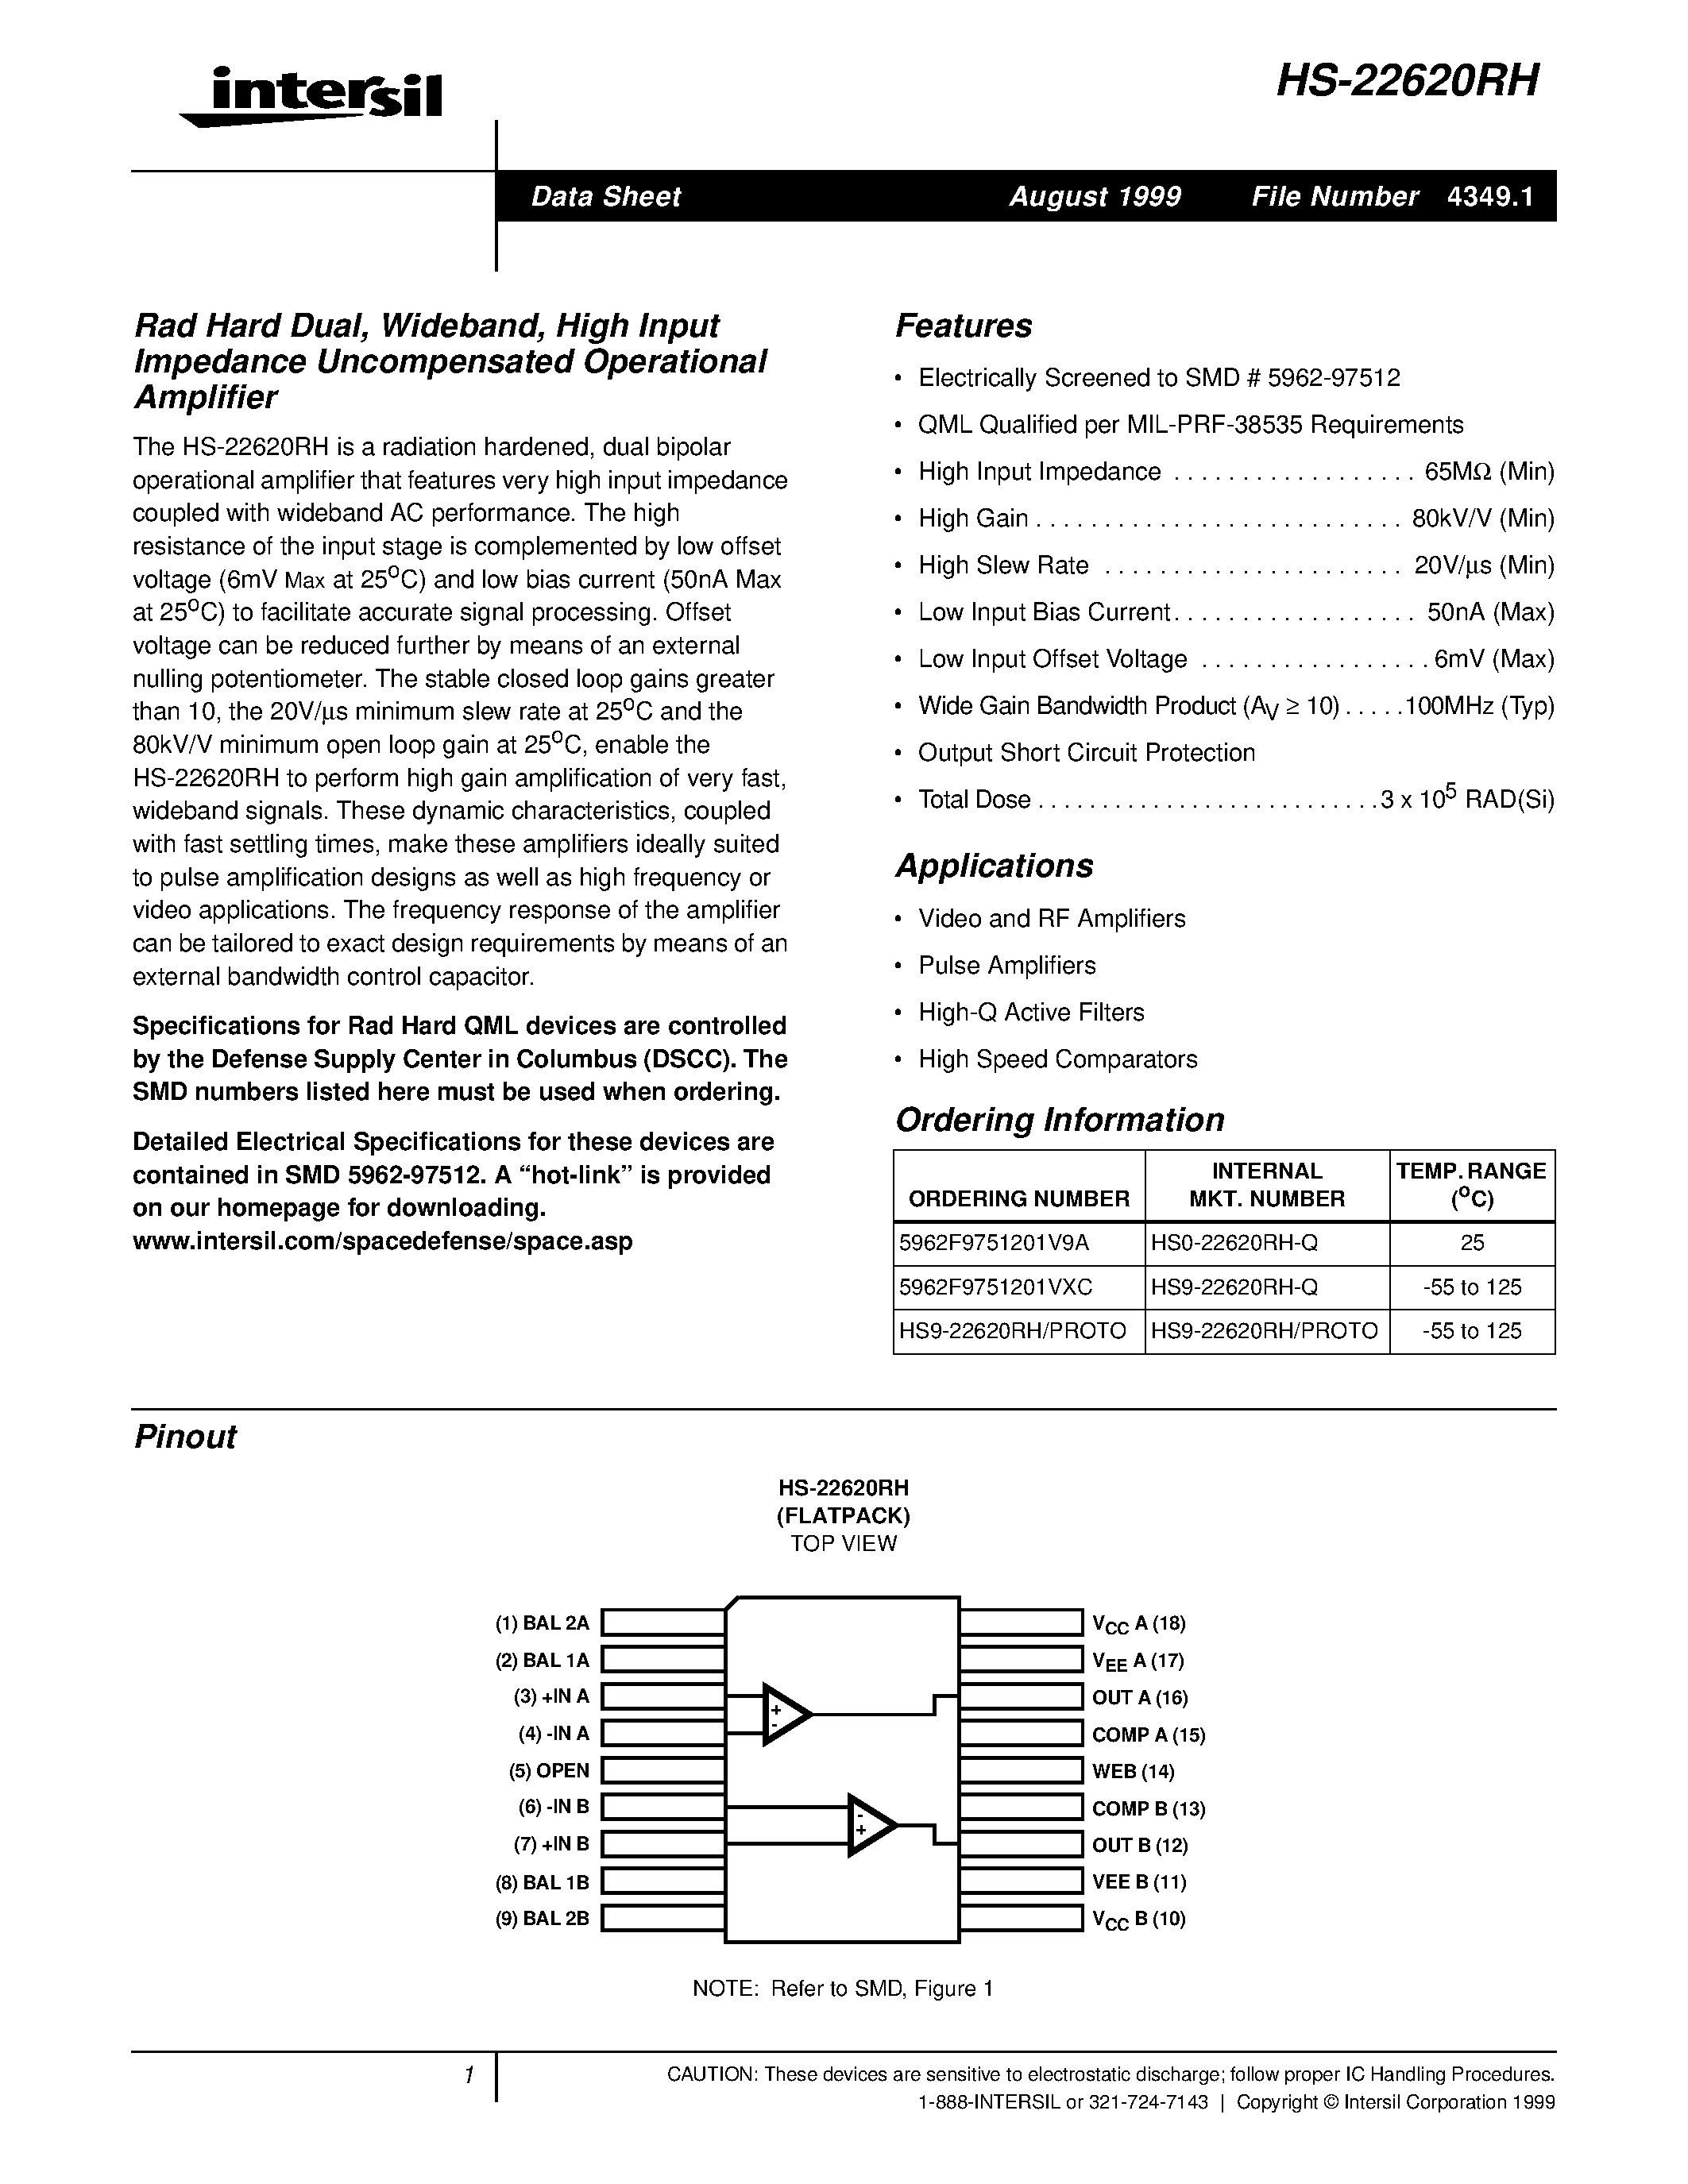 Datasheet HS9-22620RH-Q - Rad Hard Dual/ Wideband/ High Input Impedance Uncompensated Operational Amplifier page 1